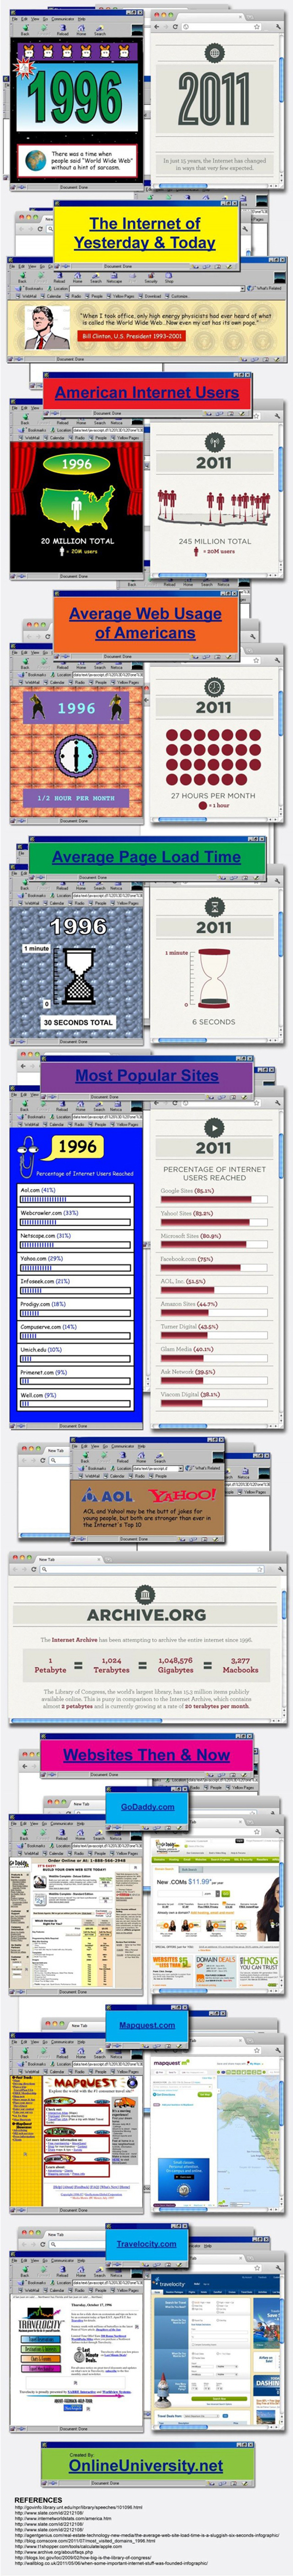 How the Internet was in 1996 vs. 2011 